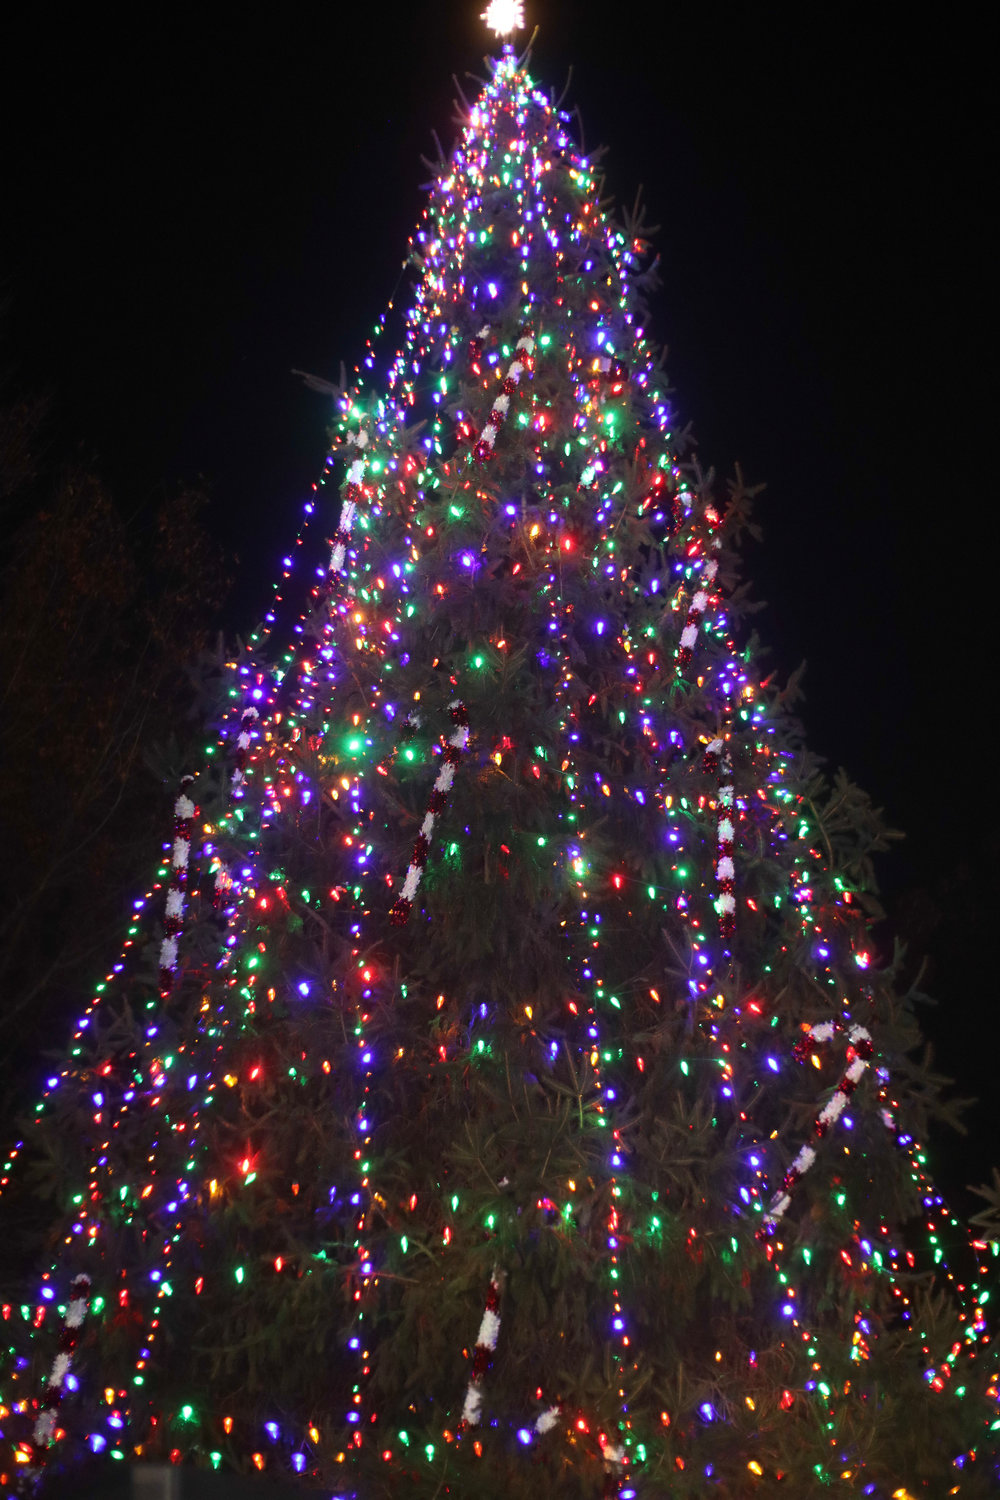 The Franklin Square Historical Society’s holiday tree lighting up the night. The 35-year-old tradition also made a comeback this year after a two-year pause.